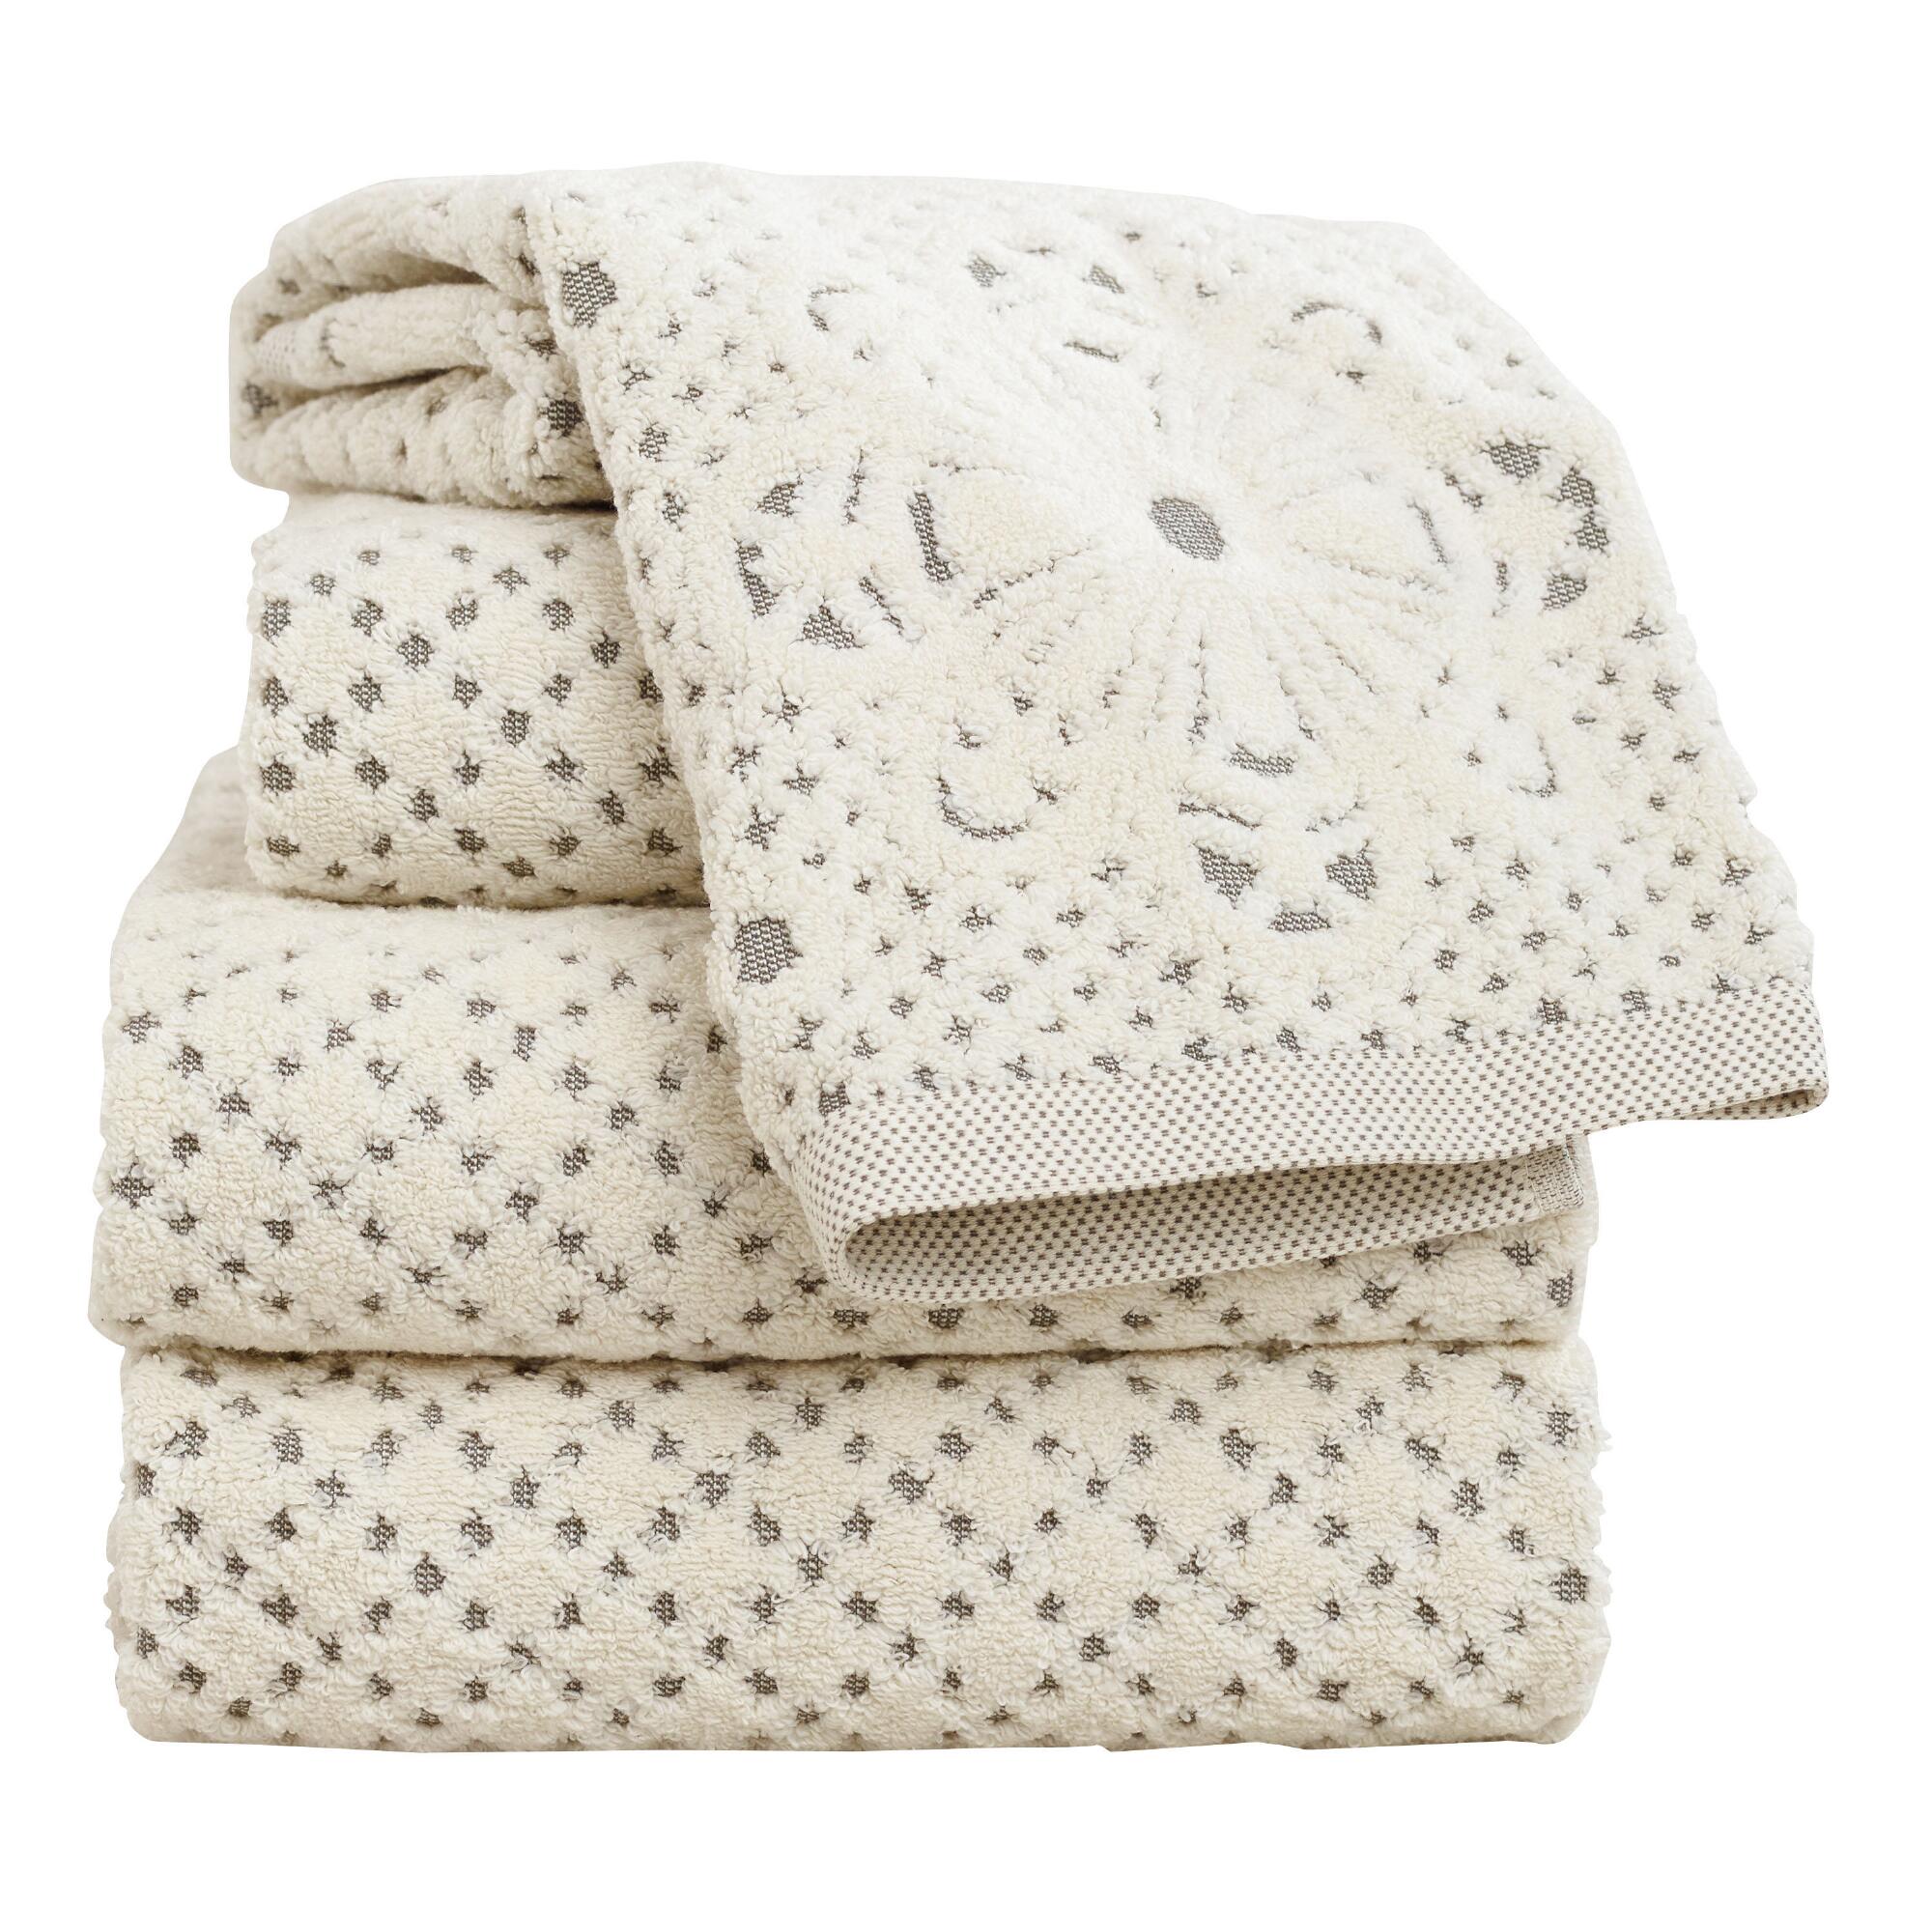 Lattice Sculpted Bath Towel Collection by World Market